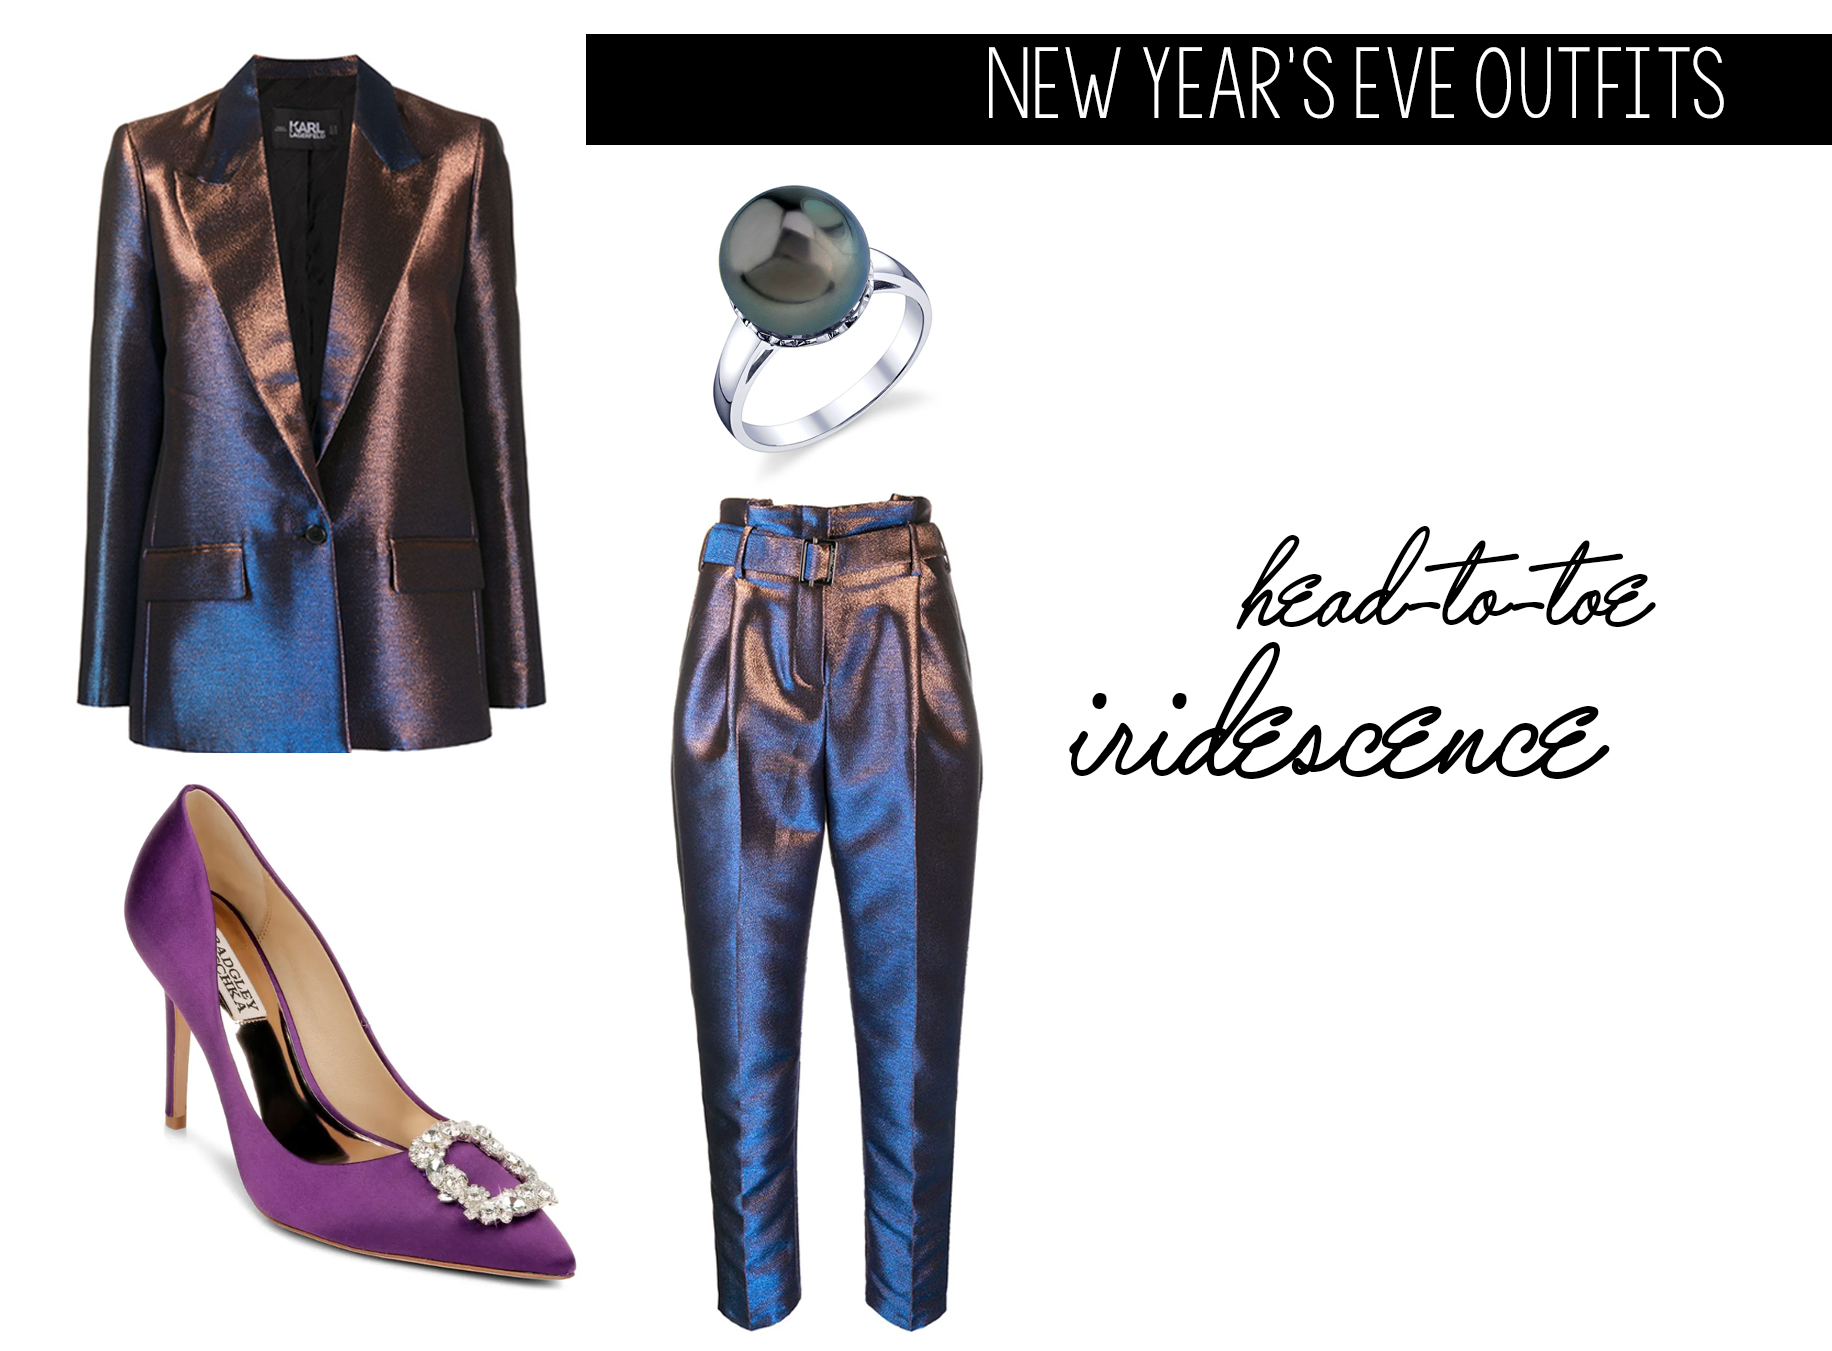 Power Suit Pizazz: Iridescence from Head to Toe  Outfit